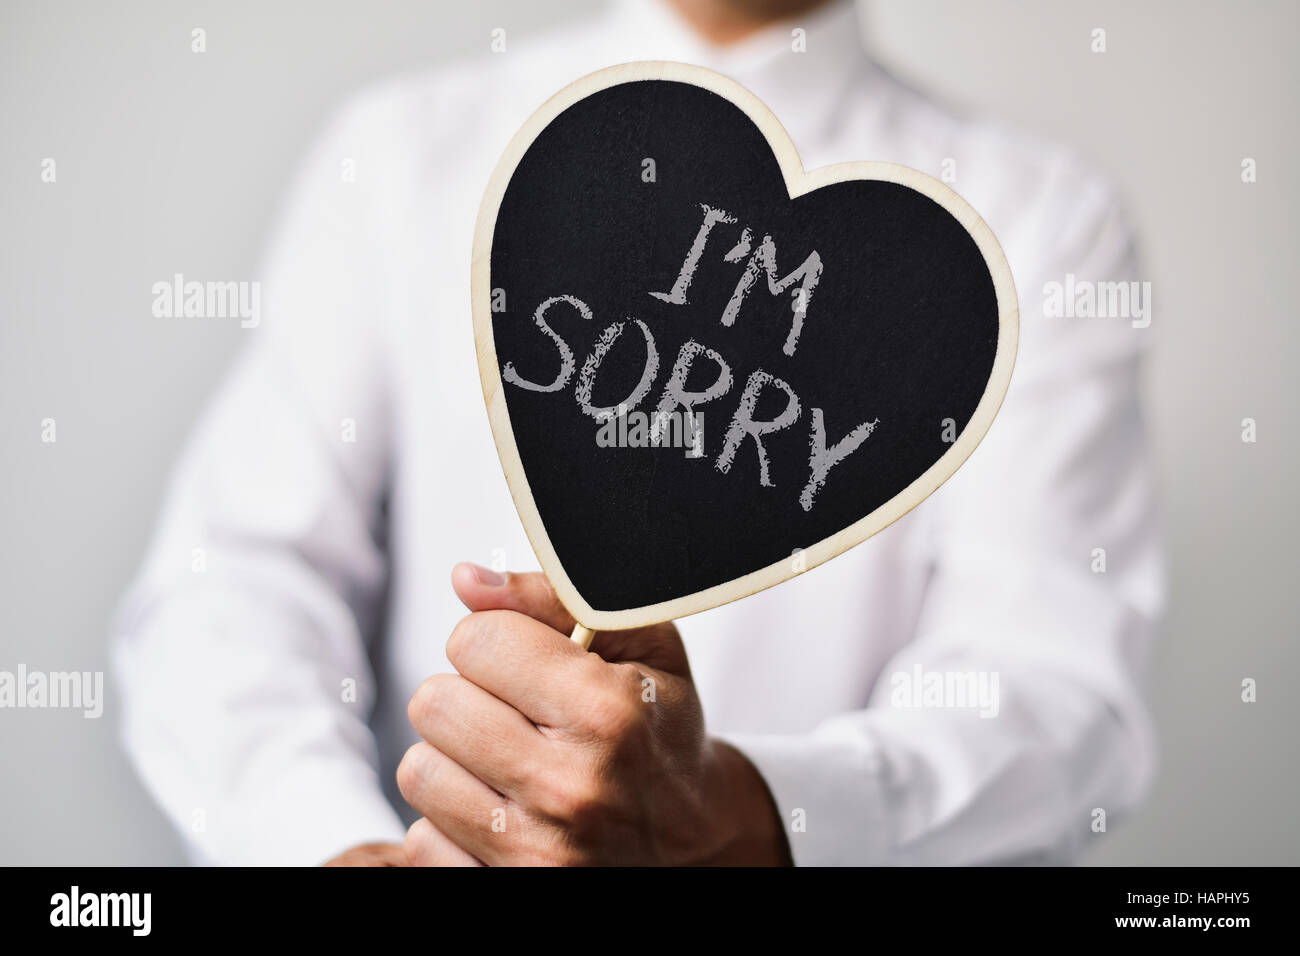 a young caucasian man wearing a white shirt shows a heart-shaped signboard with the text I am sorry written in it Stock Photo